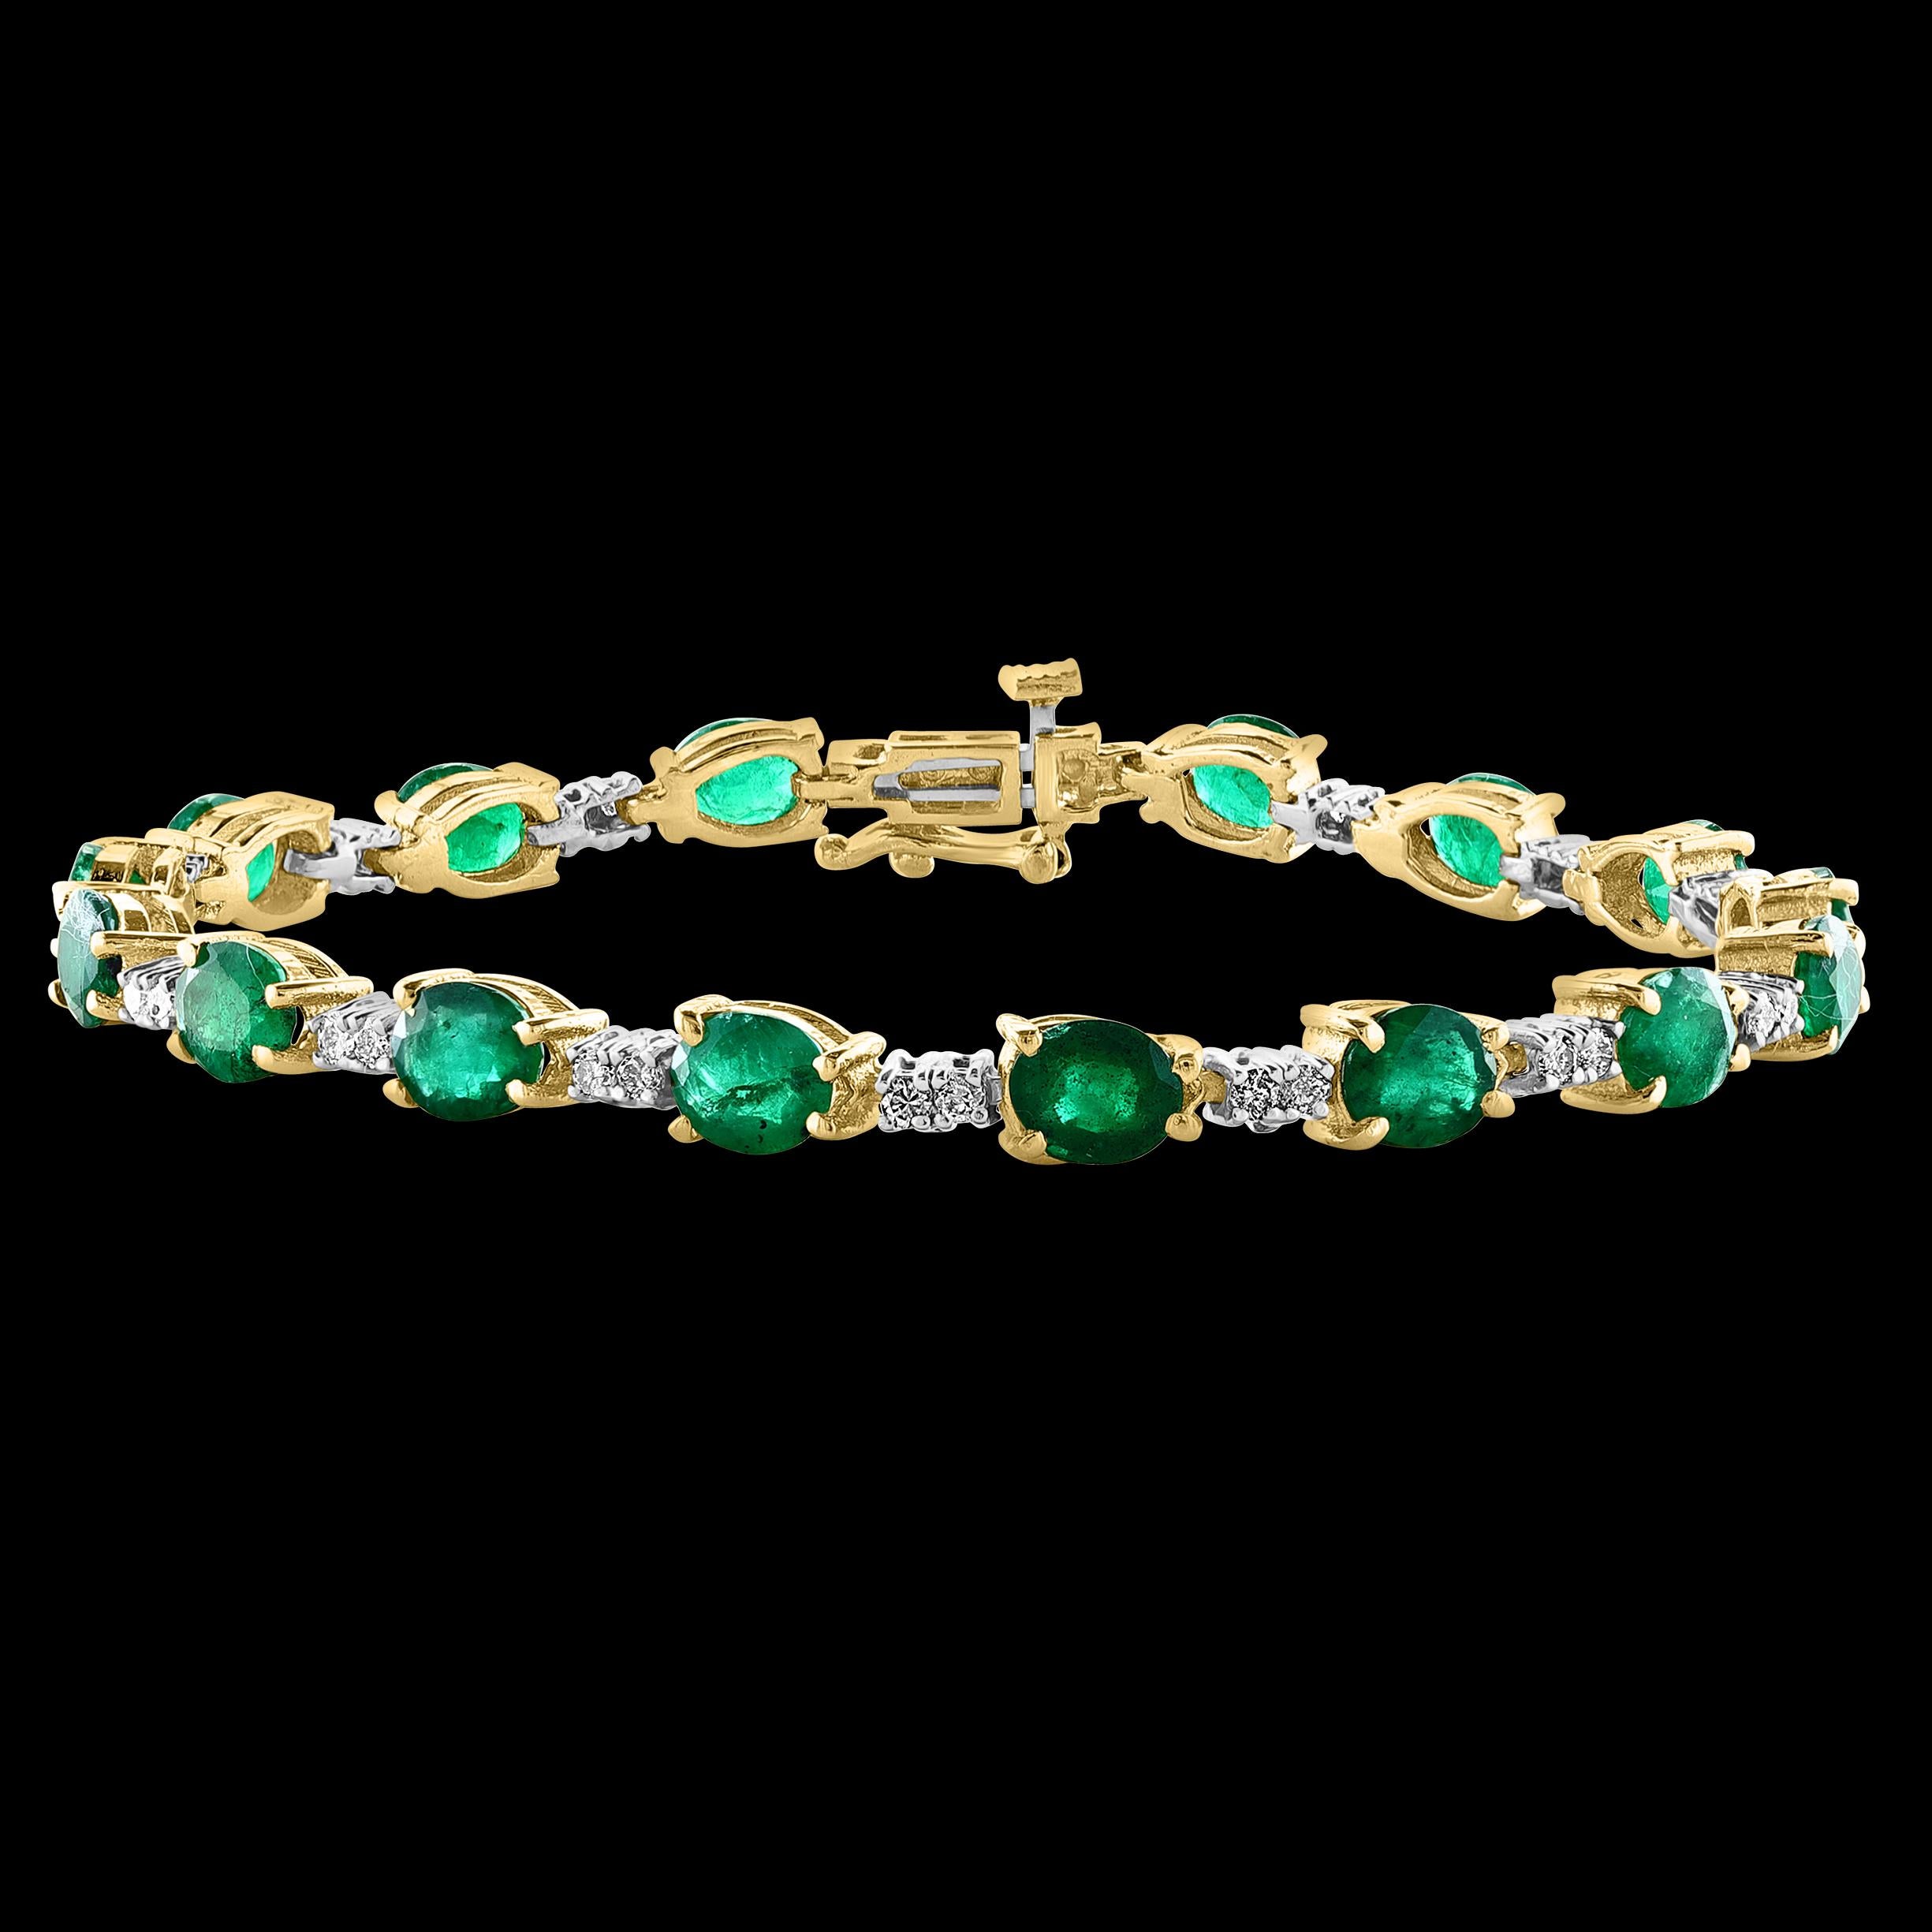  This exceptionally affordable Tennis  bracelet has  16 stones of oval  Emeralds  . Each Emerald is spaced by two diamonds . Total weight of the Emeralds is  approximately 8 carat. Total number of diamonds are 30  and diamond weighs is 0.60 ct.
The